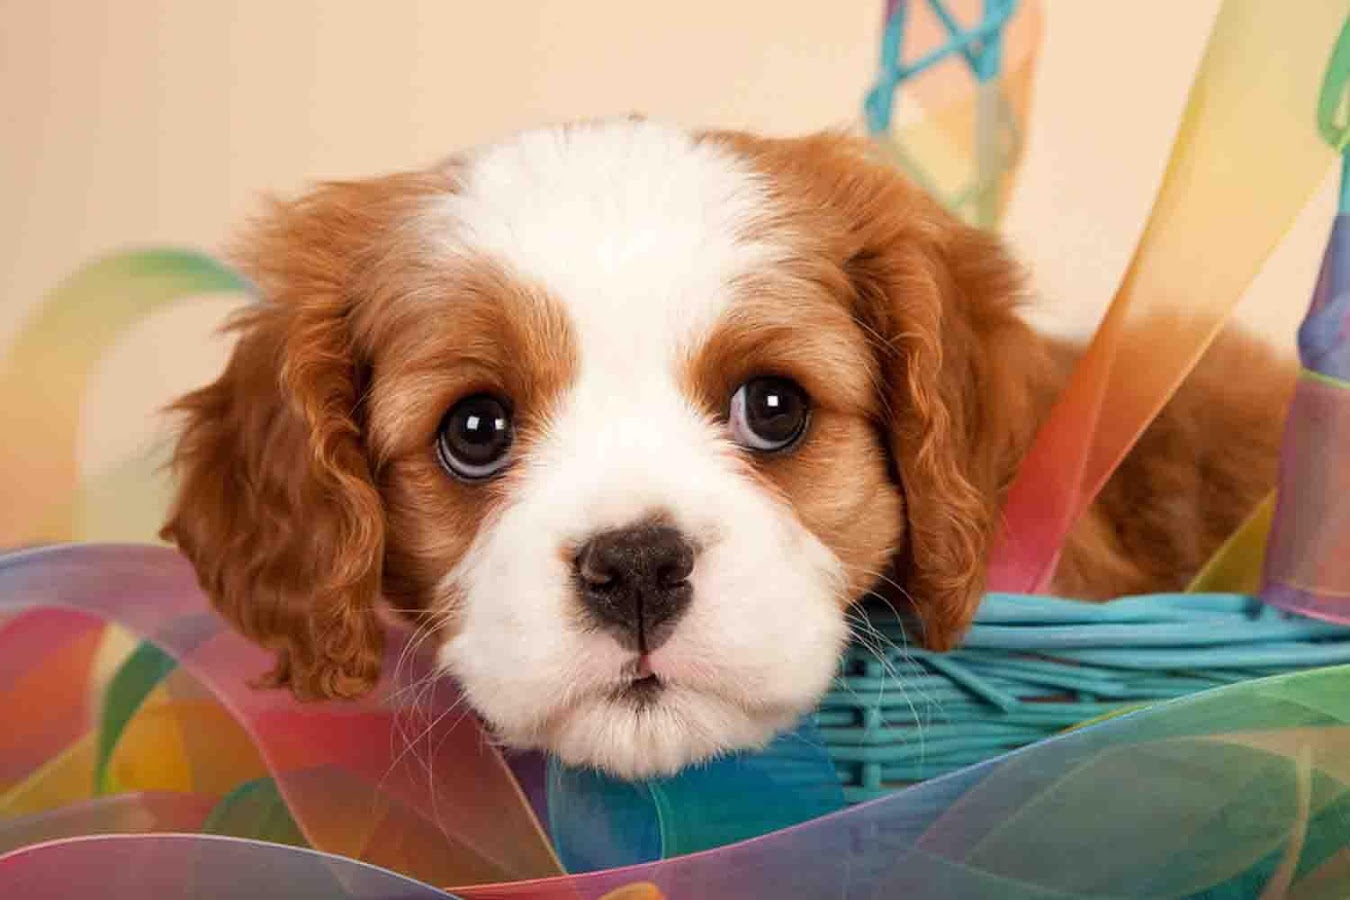 Cute Puppy Backgrounds - Android Apps on Google Play